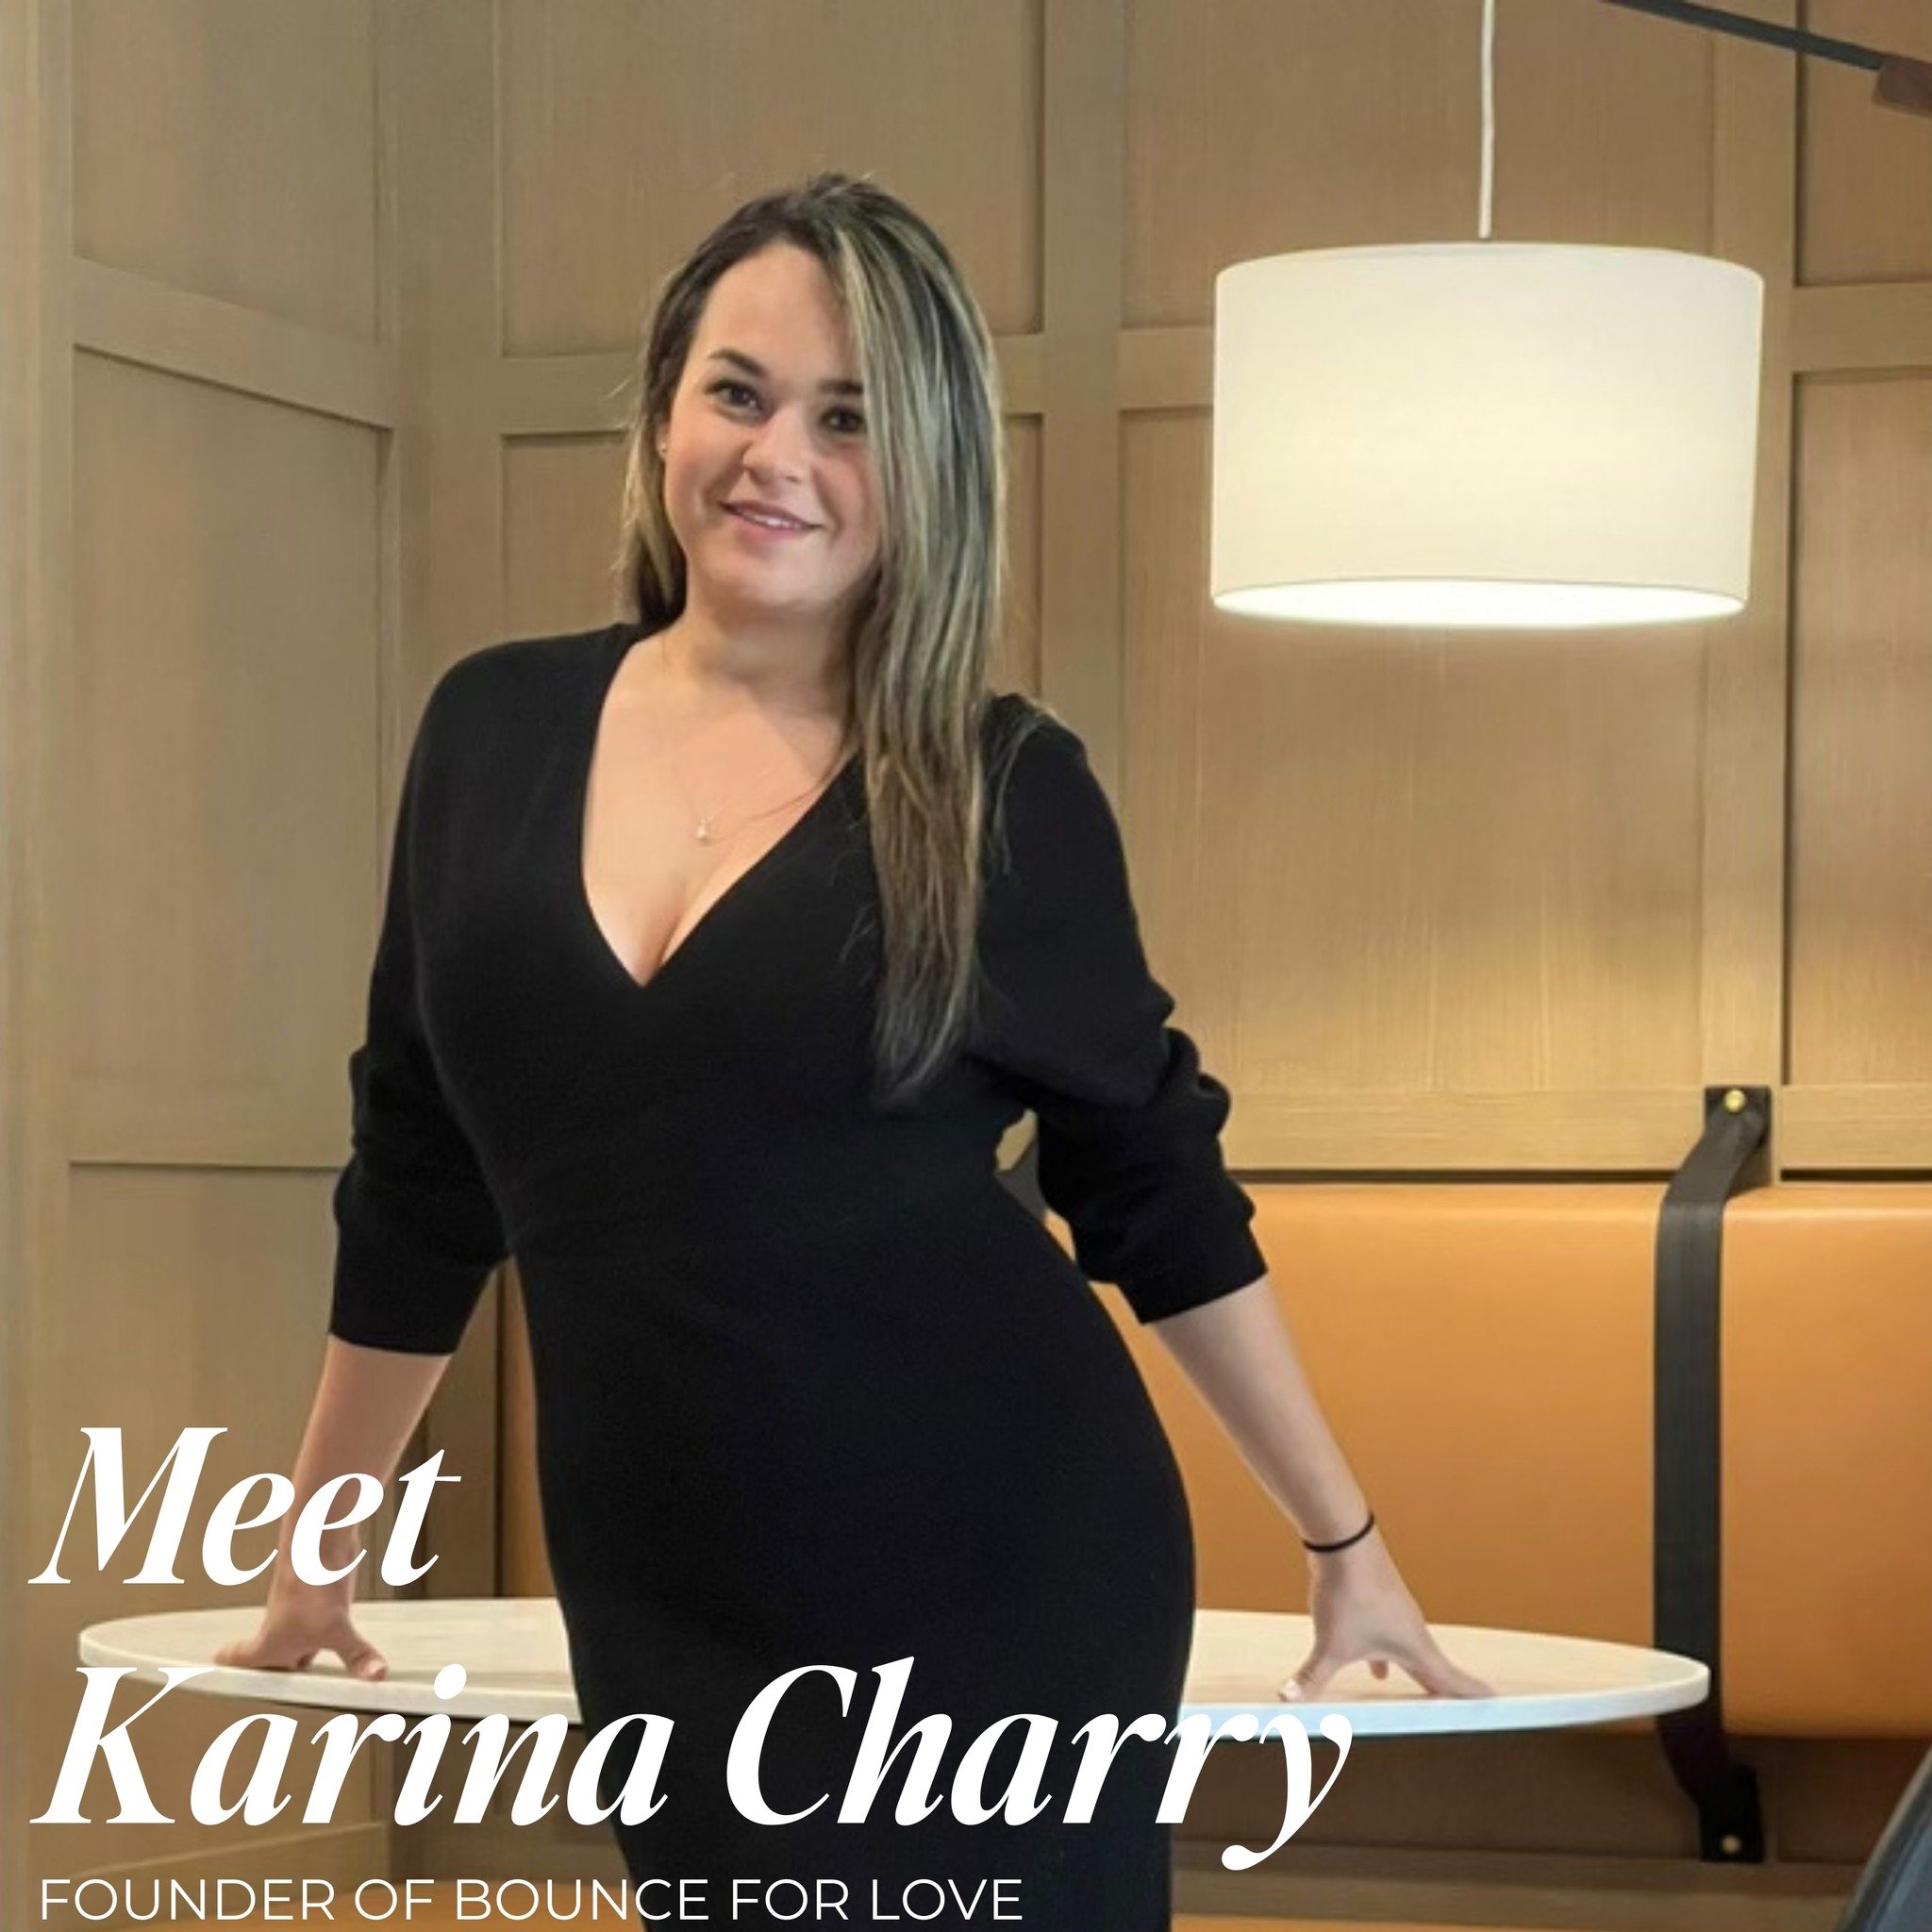 Member Monday- Karina is the founder of Bounce for Love. Bounce for Love was created by Karina with the idea of having fun with aesthetically pleasing decor. Bounce for Love specializes in aesthetically pleasing events, offering custom and personaliz